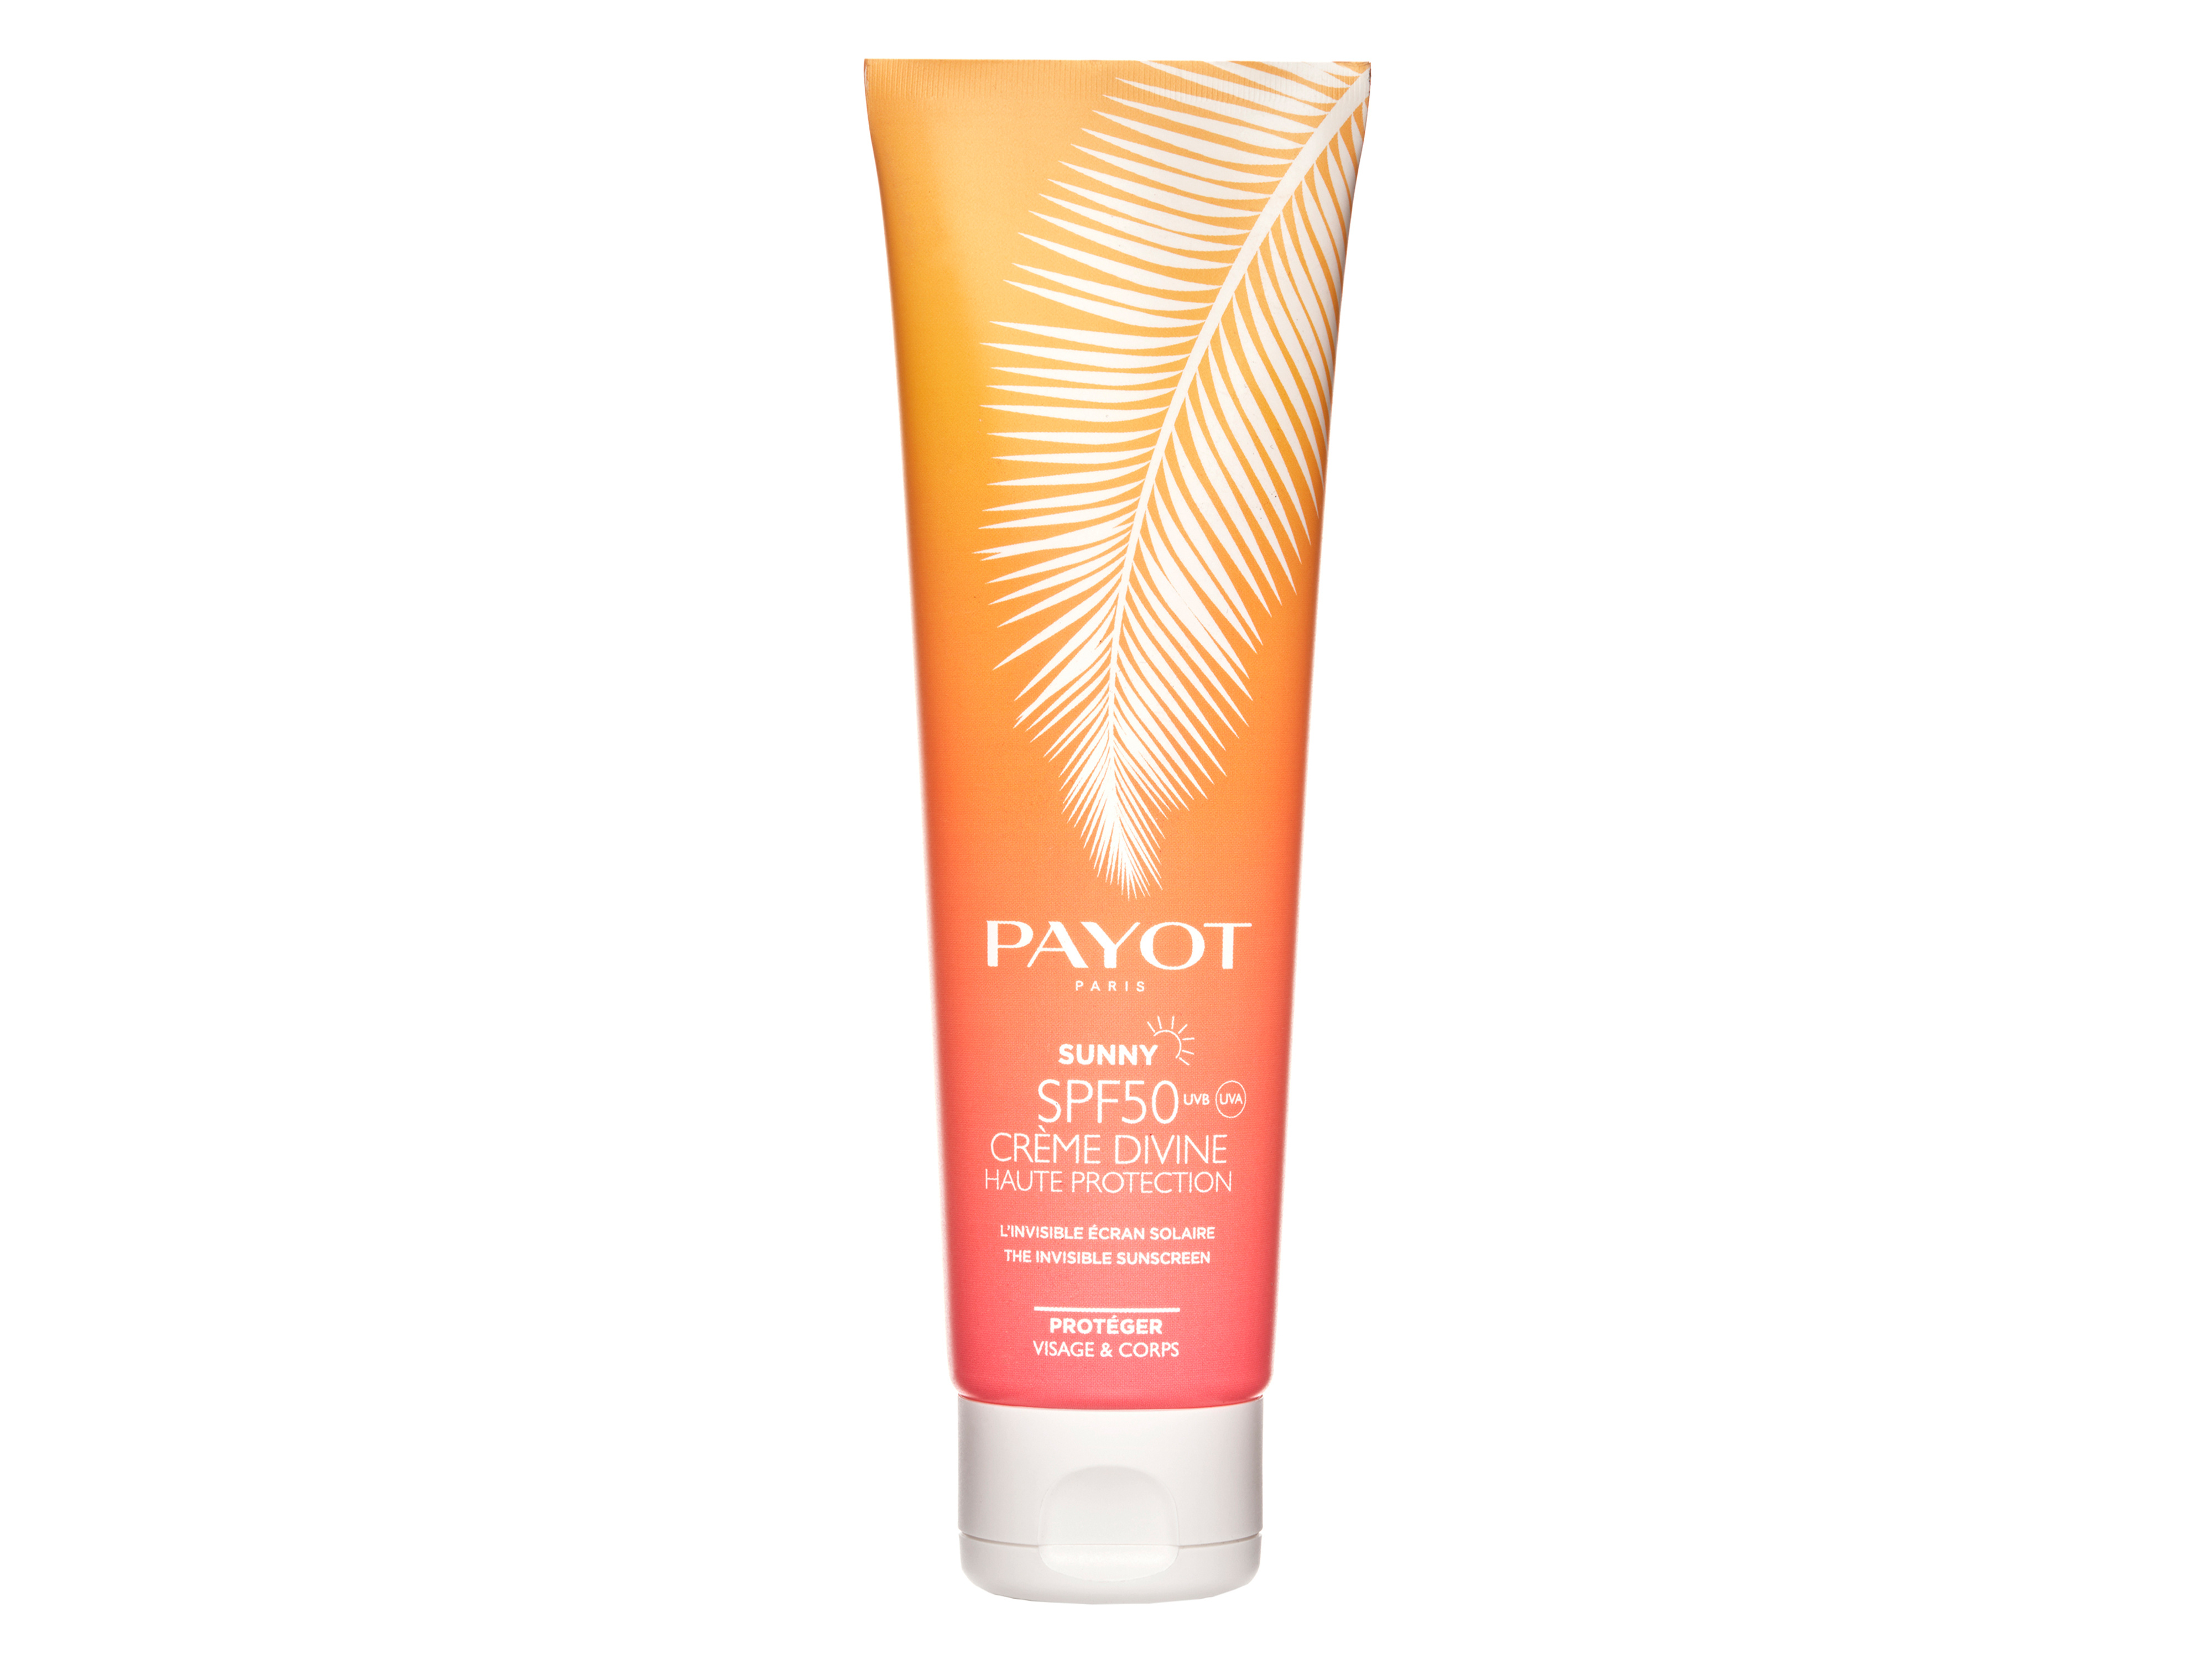 Payot Sunny Crème Divine Face and Body, SPF 50, 150 ml